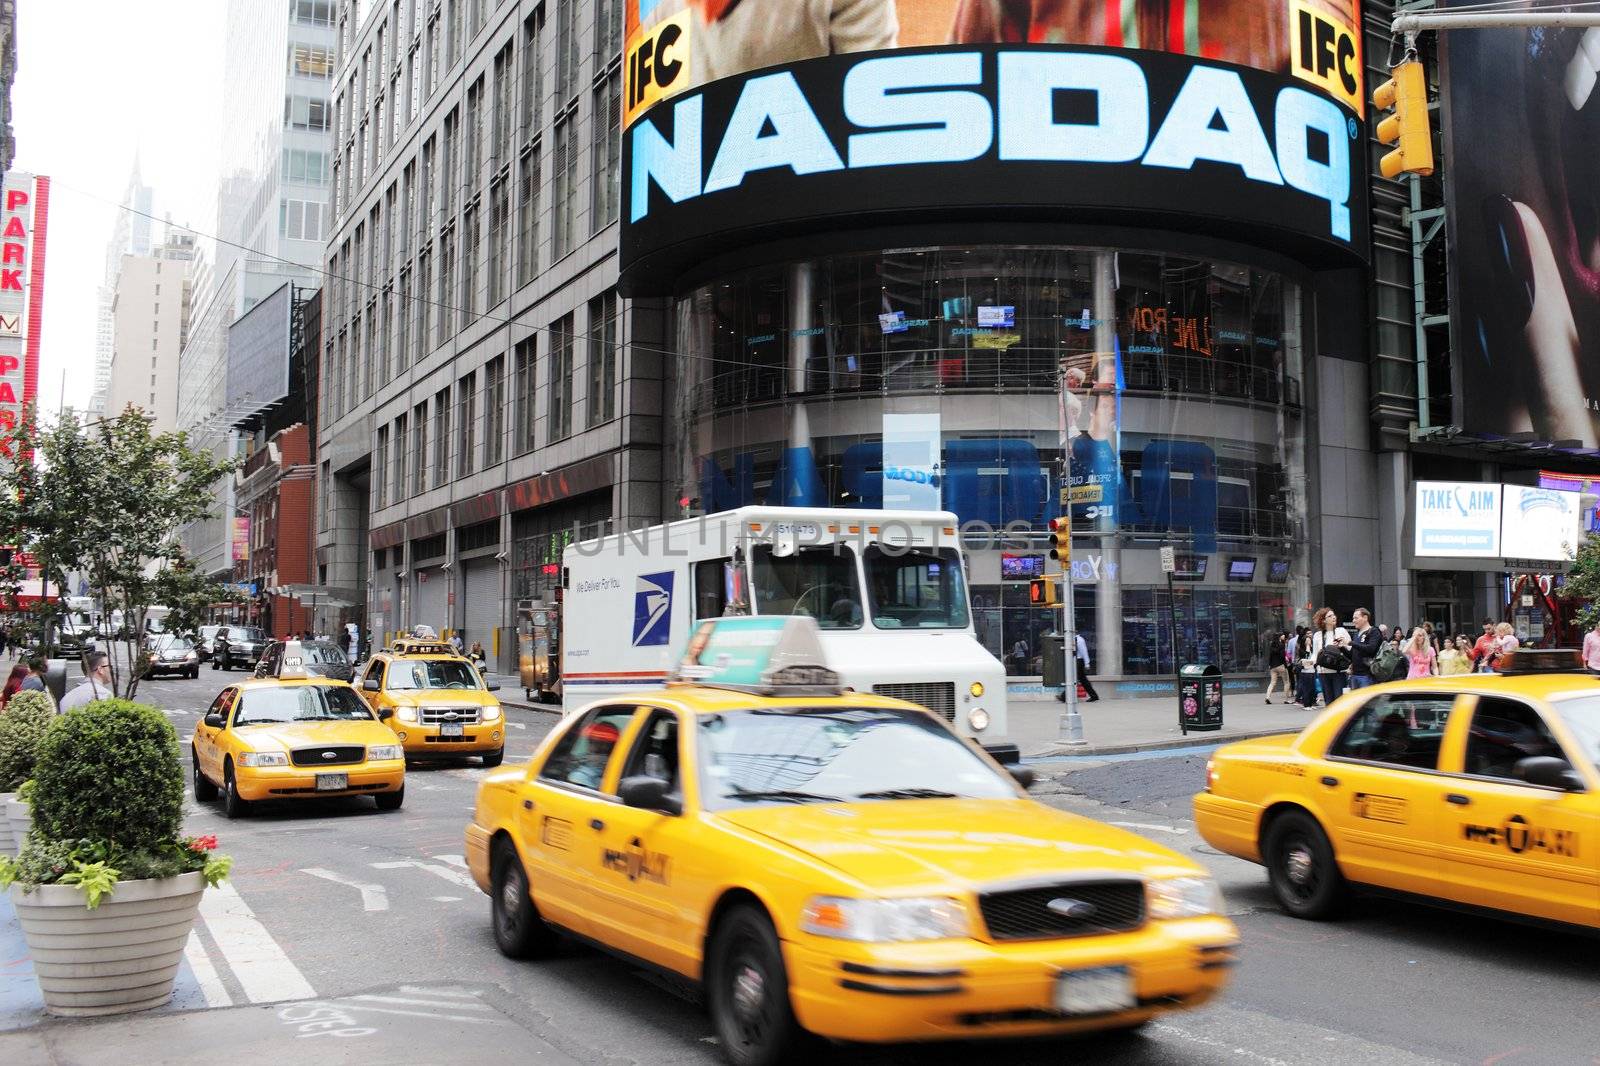 NEW YORK CITY, USA - JUNE 12: NASDAQ building on Times Square. NASDAQ is an American stock exchange. June 12, 2012 in New York City, USA